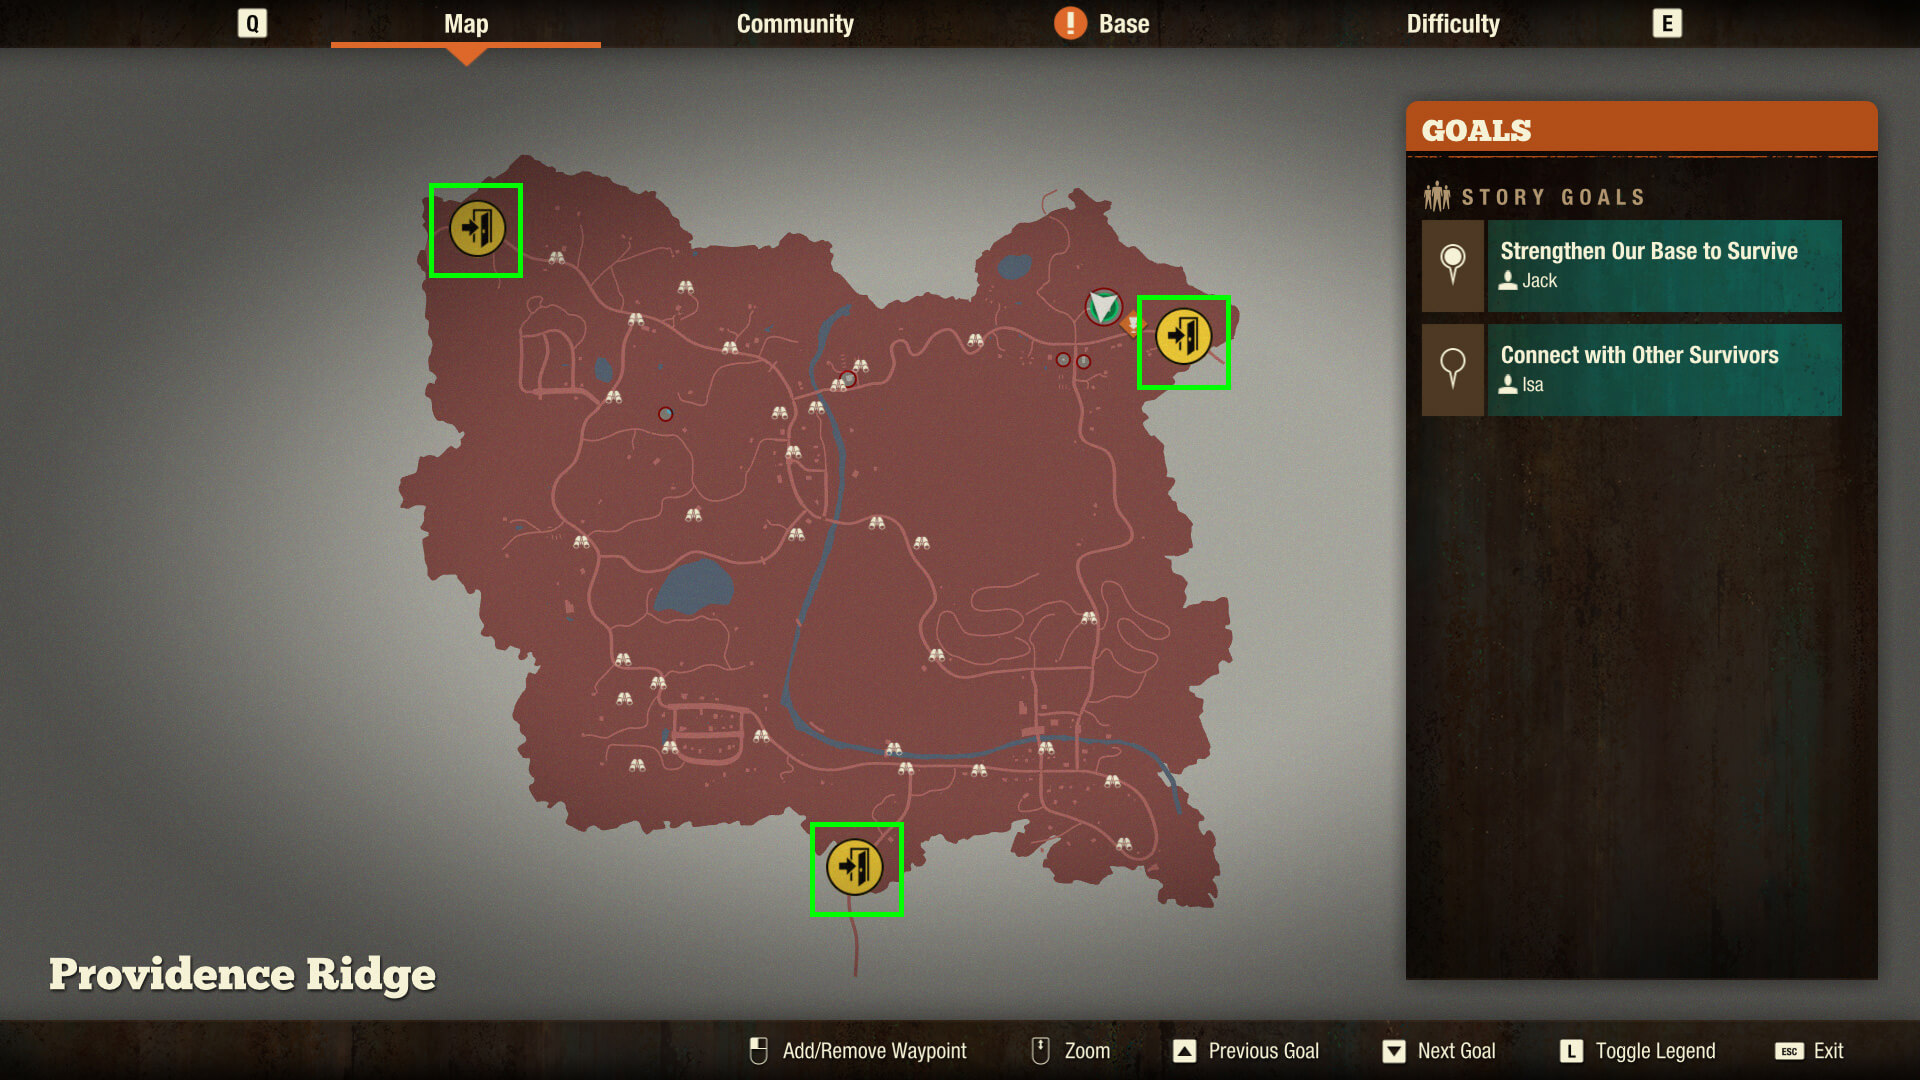 State of Decay 2 Player Guide [PDF Download Available]